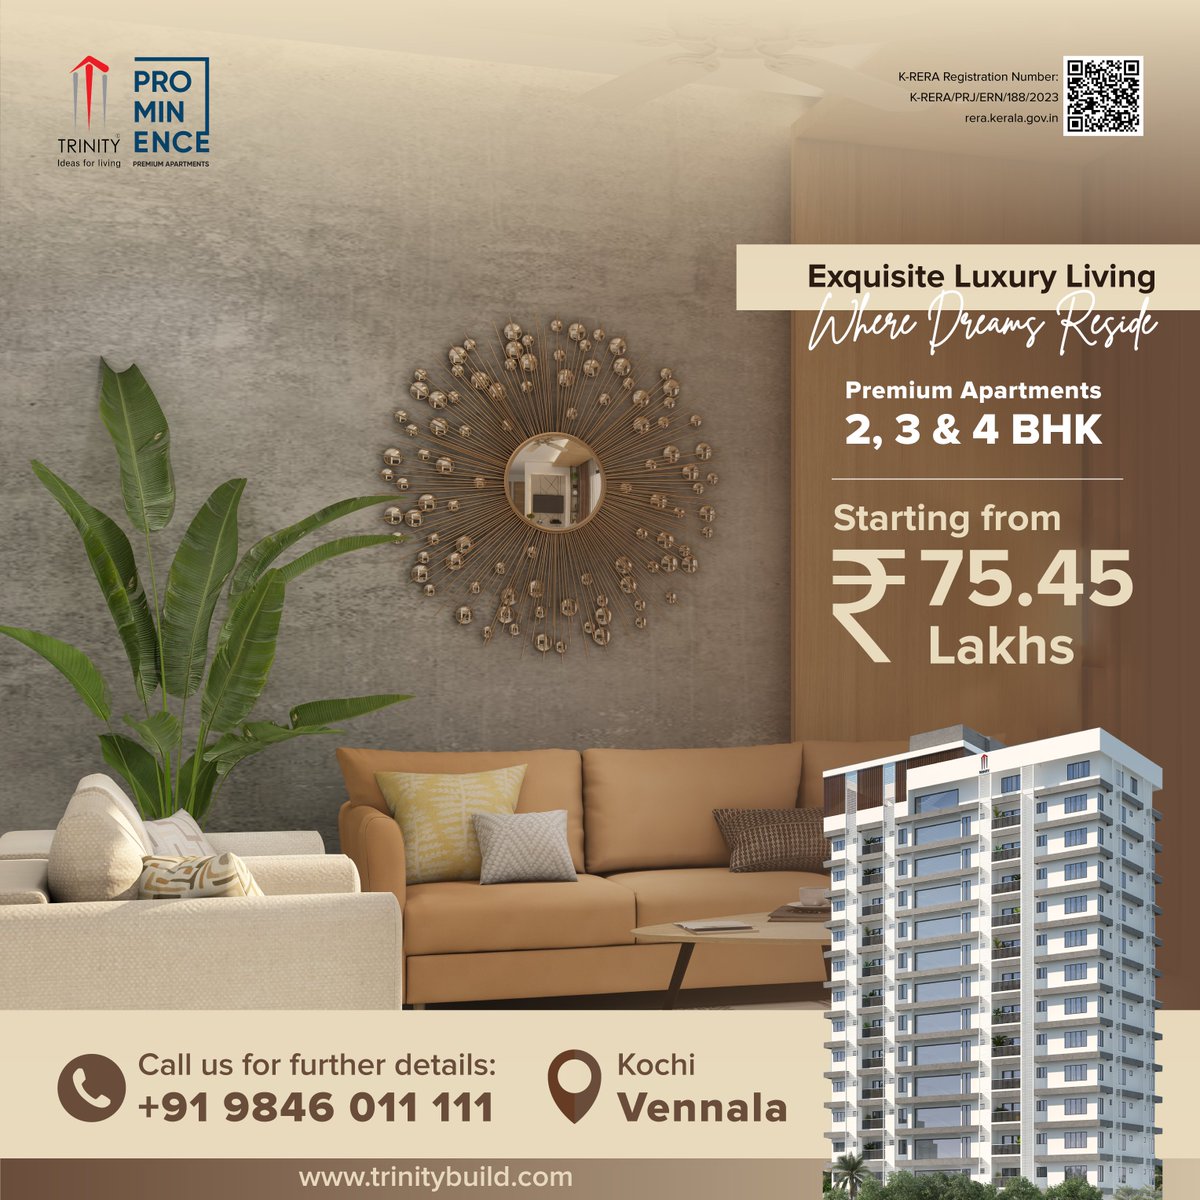 Your Dream Home is Here. Trinity Prominence - 2, 3 & 4 BHK Apartments.

Visit our website to know more: : trinitybuild.com
Call us/WhatsApp: +91 - 98460 11111

#TrinityProminence #luxuryliving #luxurylifestyle #luxuryapartments #dreamhome #DreamLiving #modernamenities